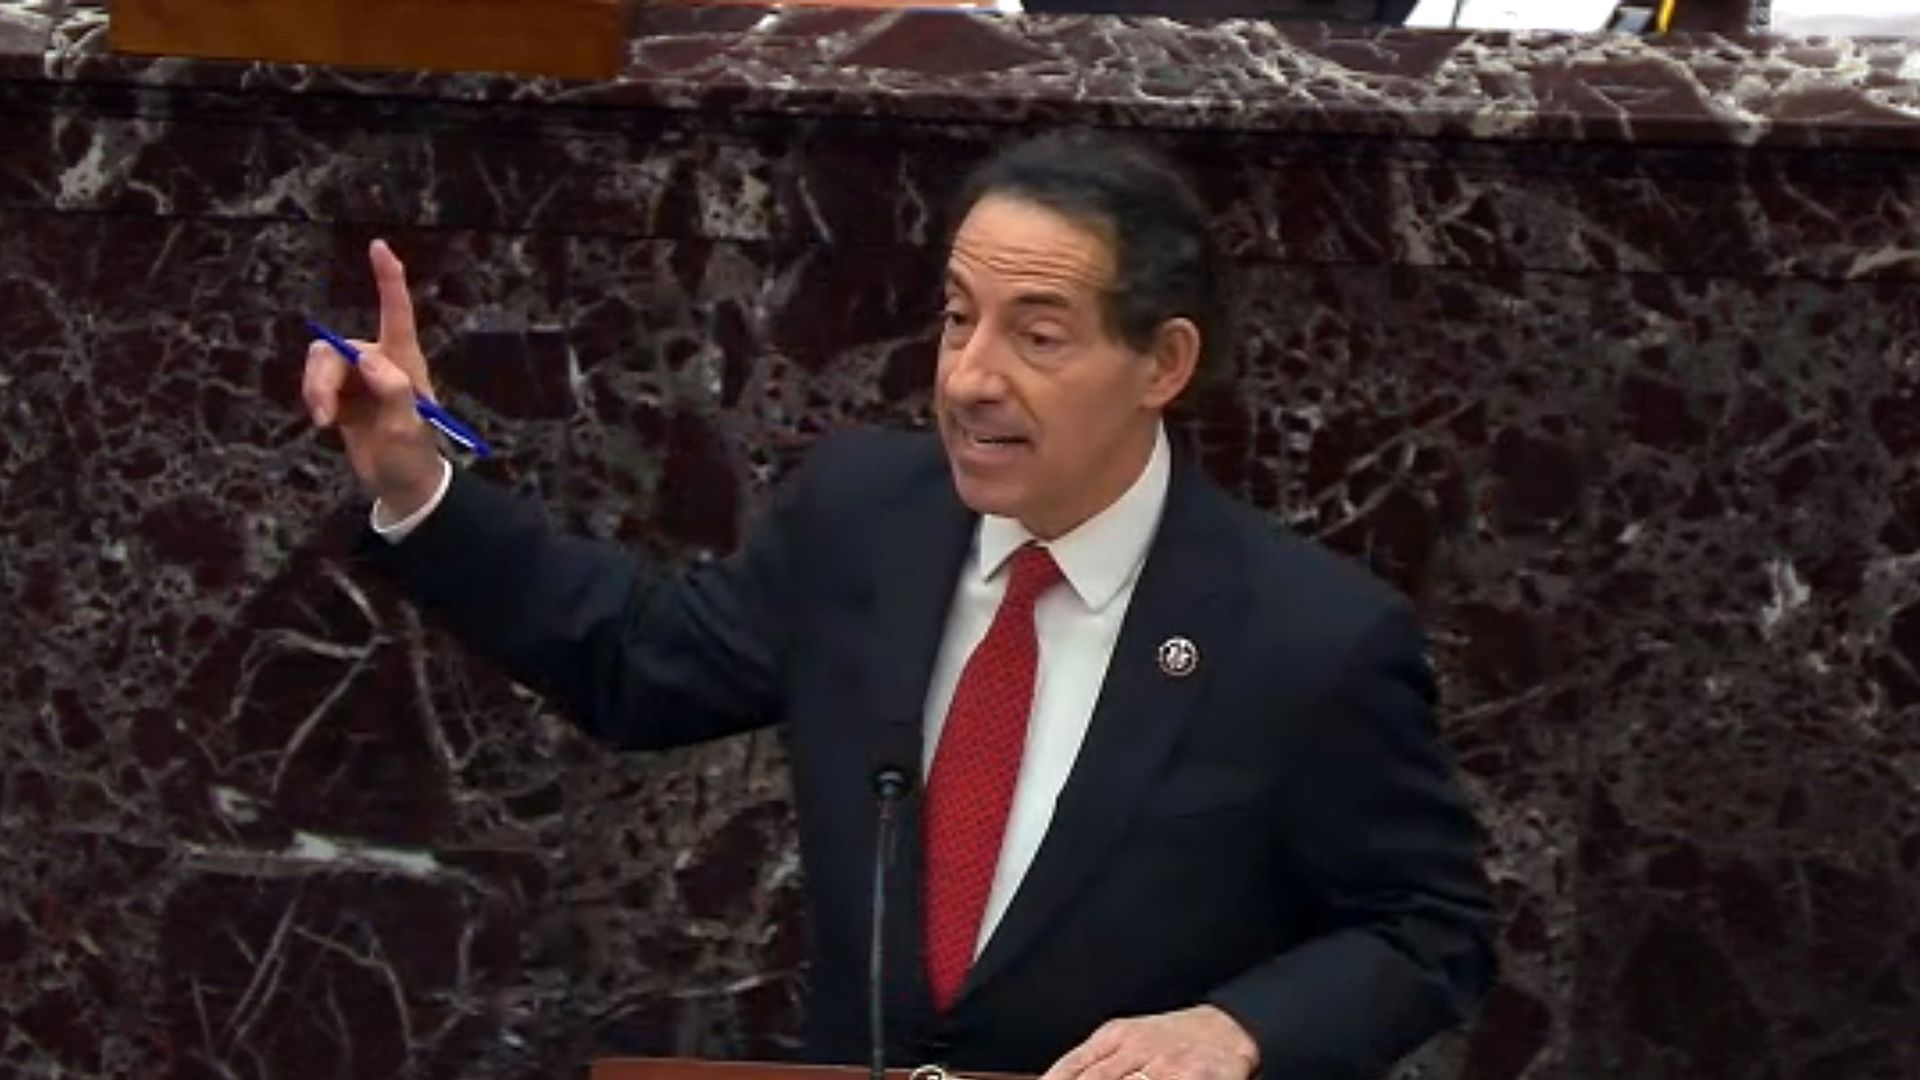 Lead House impeachment manager Rep. Jamie Raskin is seen delivering arguments Tuesday.